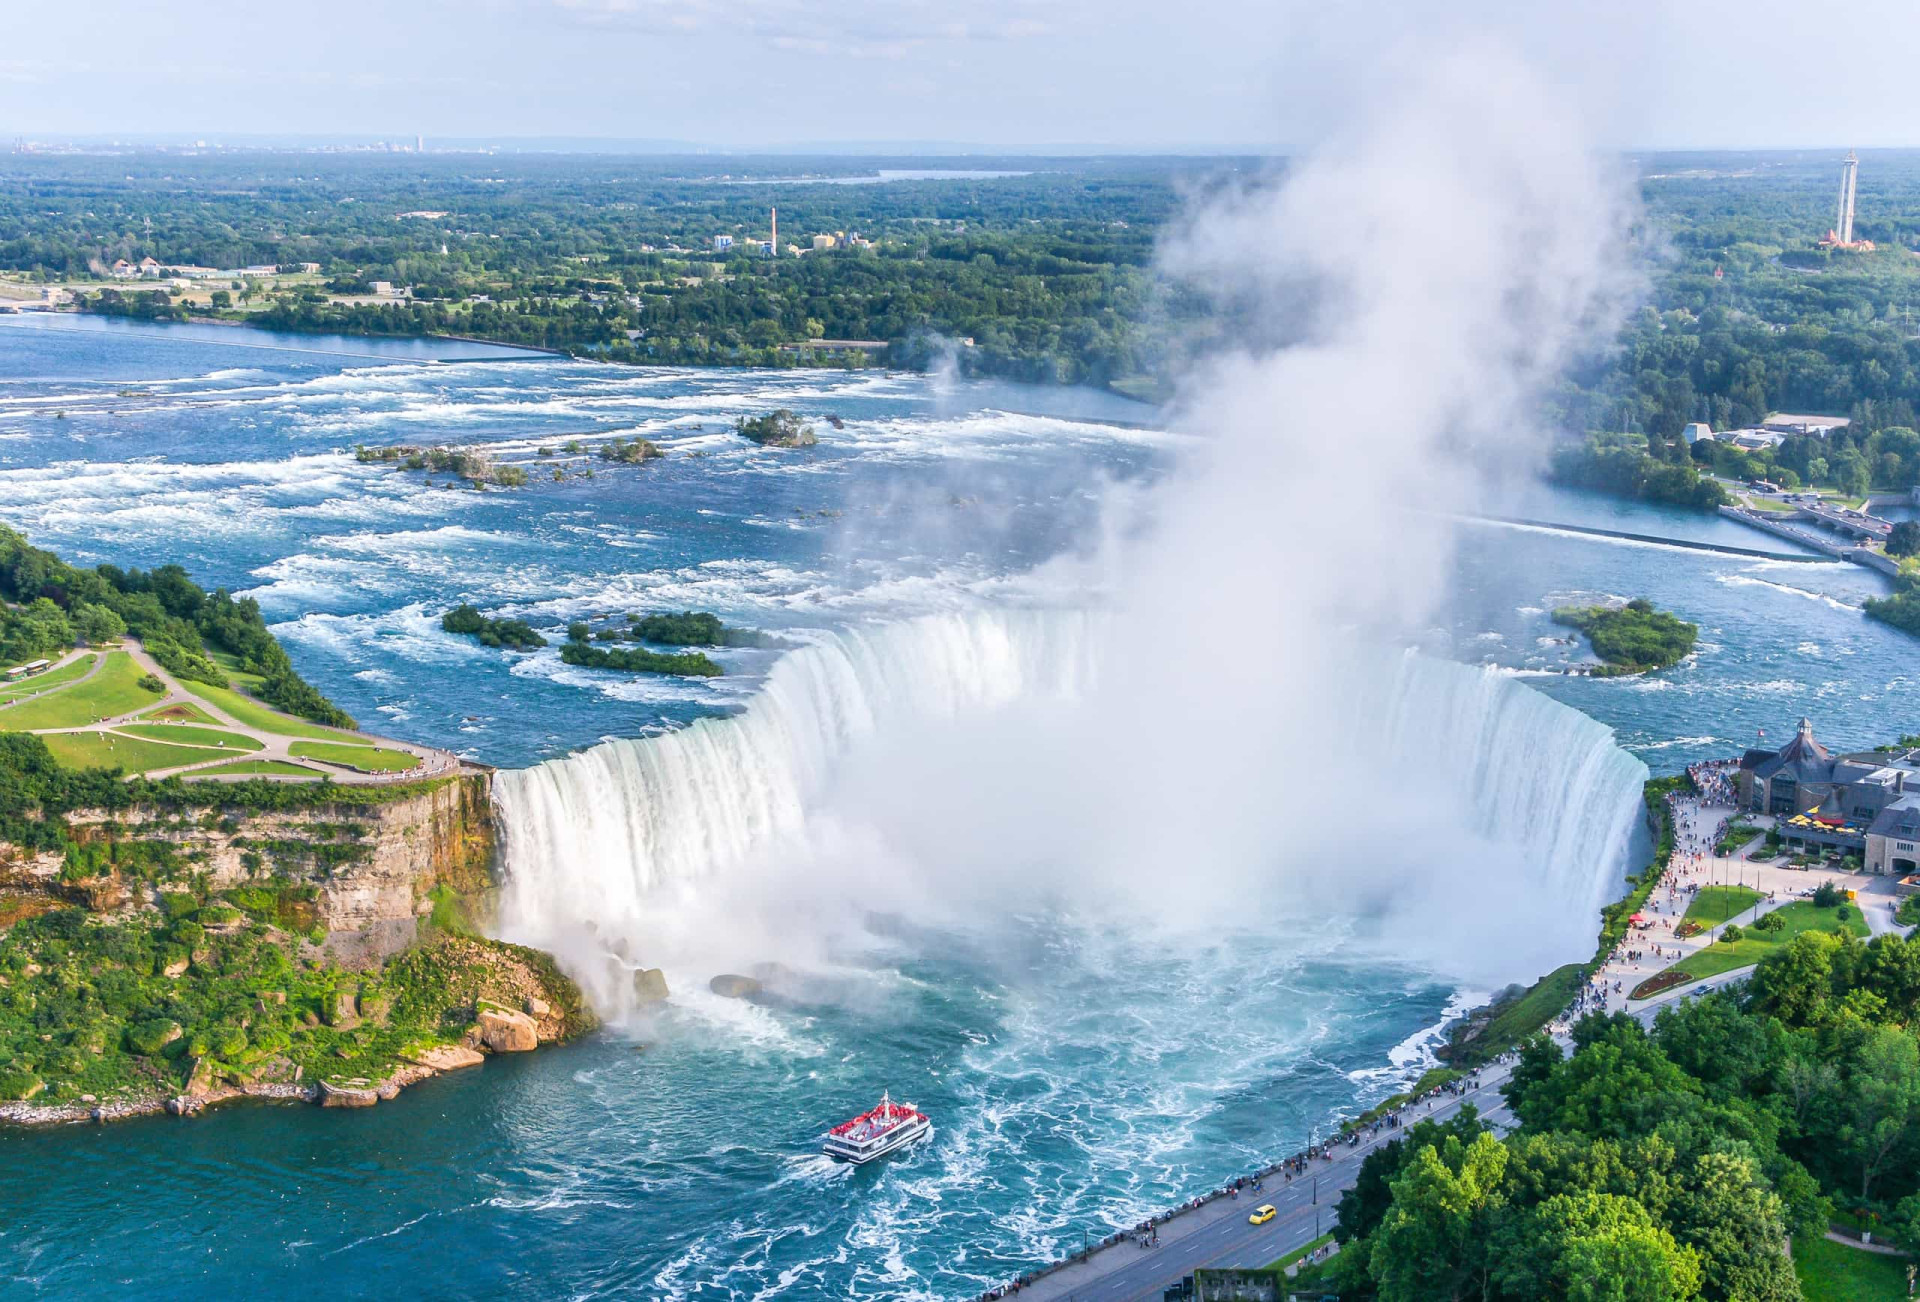 <p>The Niagara region in Ontario is the best place to see totality in Canada, with the mighty falls adding extra visual drama during the three minutes and 15 seconds of darkness.</p><p><a href="https://www.msn.com/en-ca/community/channel/vid-7xx8mnucu55yw63we9va2gwr7uihbxwc68fxqp25x6tg4ftibpra?cvid=94631541bc0f4f89bfd59158d696ad7e">Follow us and access great exclusive content every day</a></p>